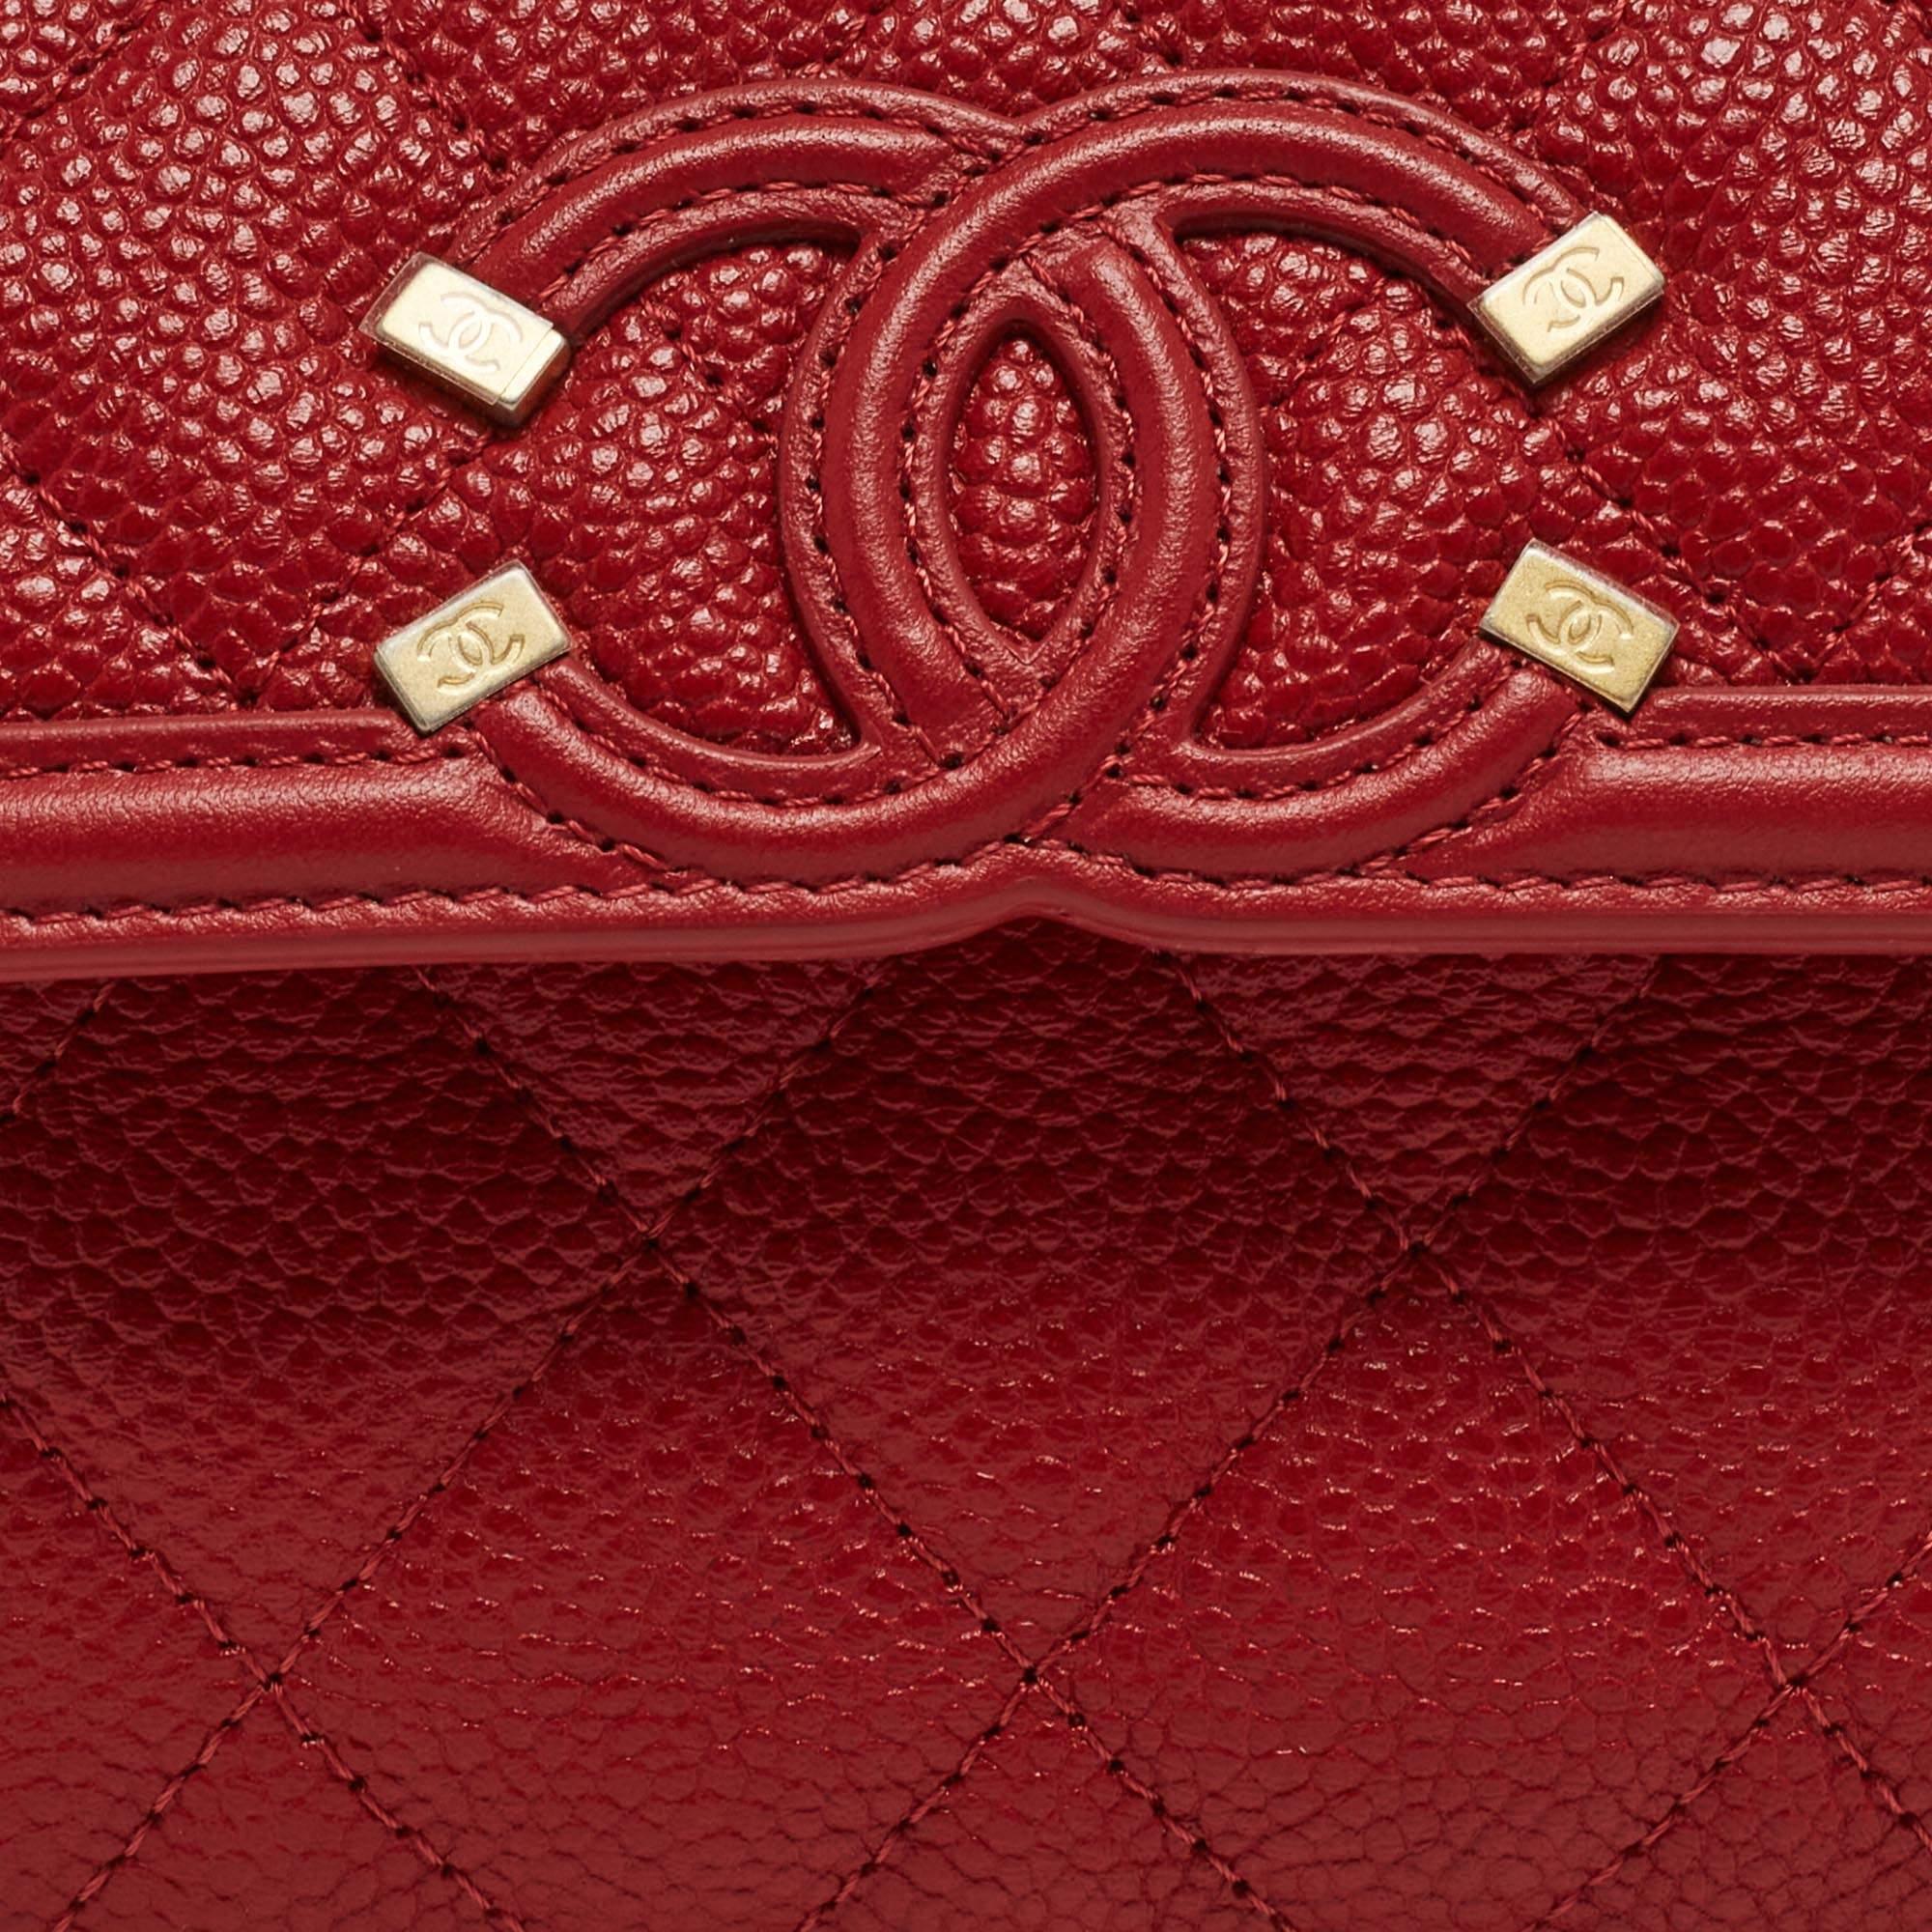 Chanel Red Quilted Caviar Leather Filigree Wallet In Excellent Condition For Sale In Dubai, Al Qouz 2